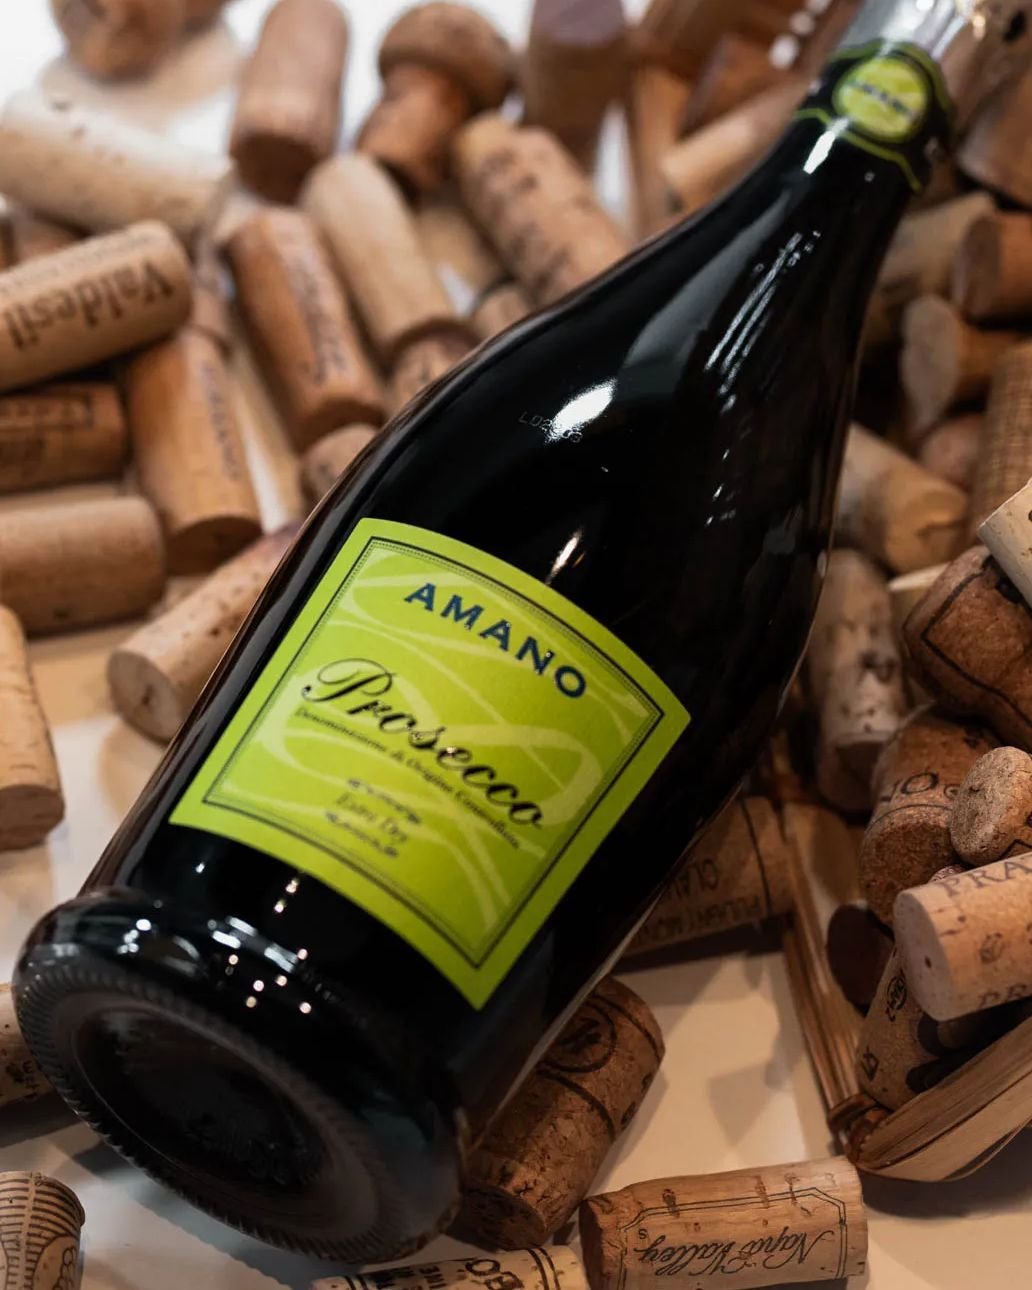 🌼 As spring unfurls, picture yourself savoring the delicately crisp bubbles of Amano Prosecco, adorned with delightful notes of peach, granny smith apple, and a hint of lime. This straw-colored wine is a summer's day in a bottle, sure to refresh and